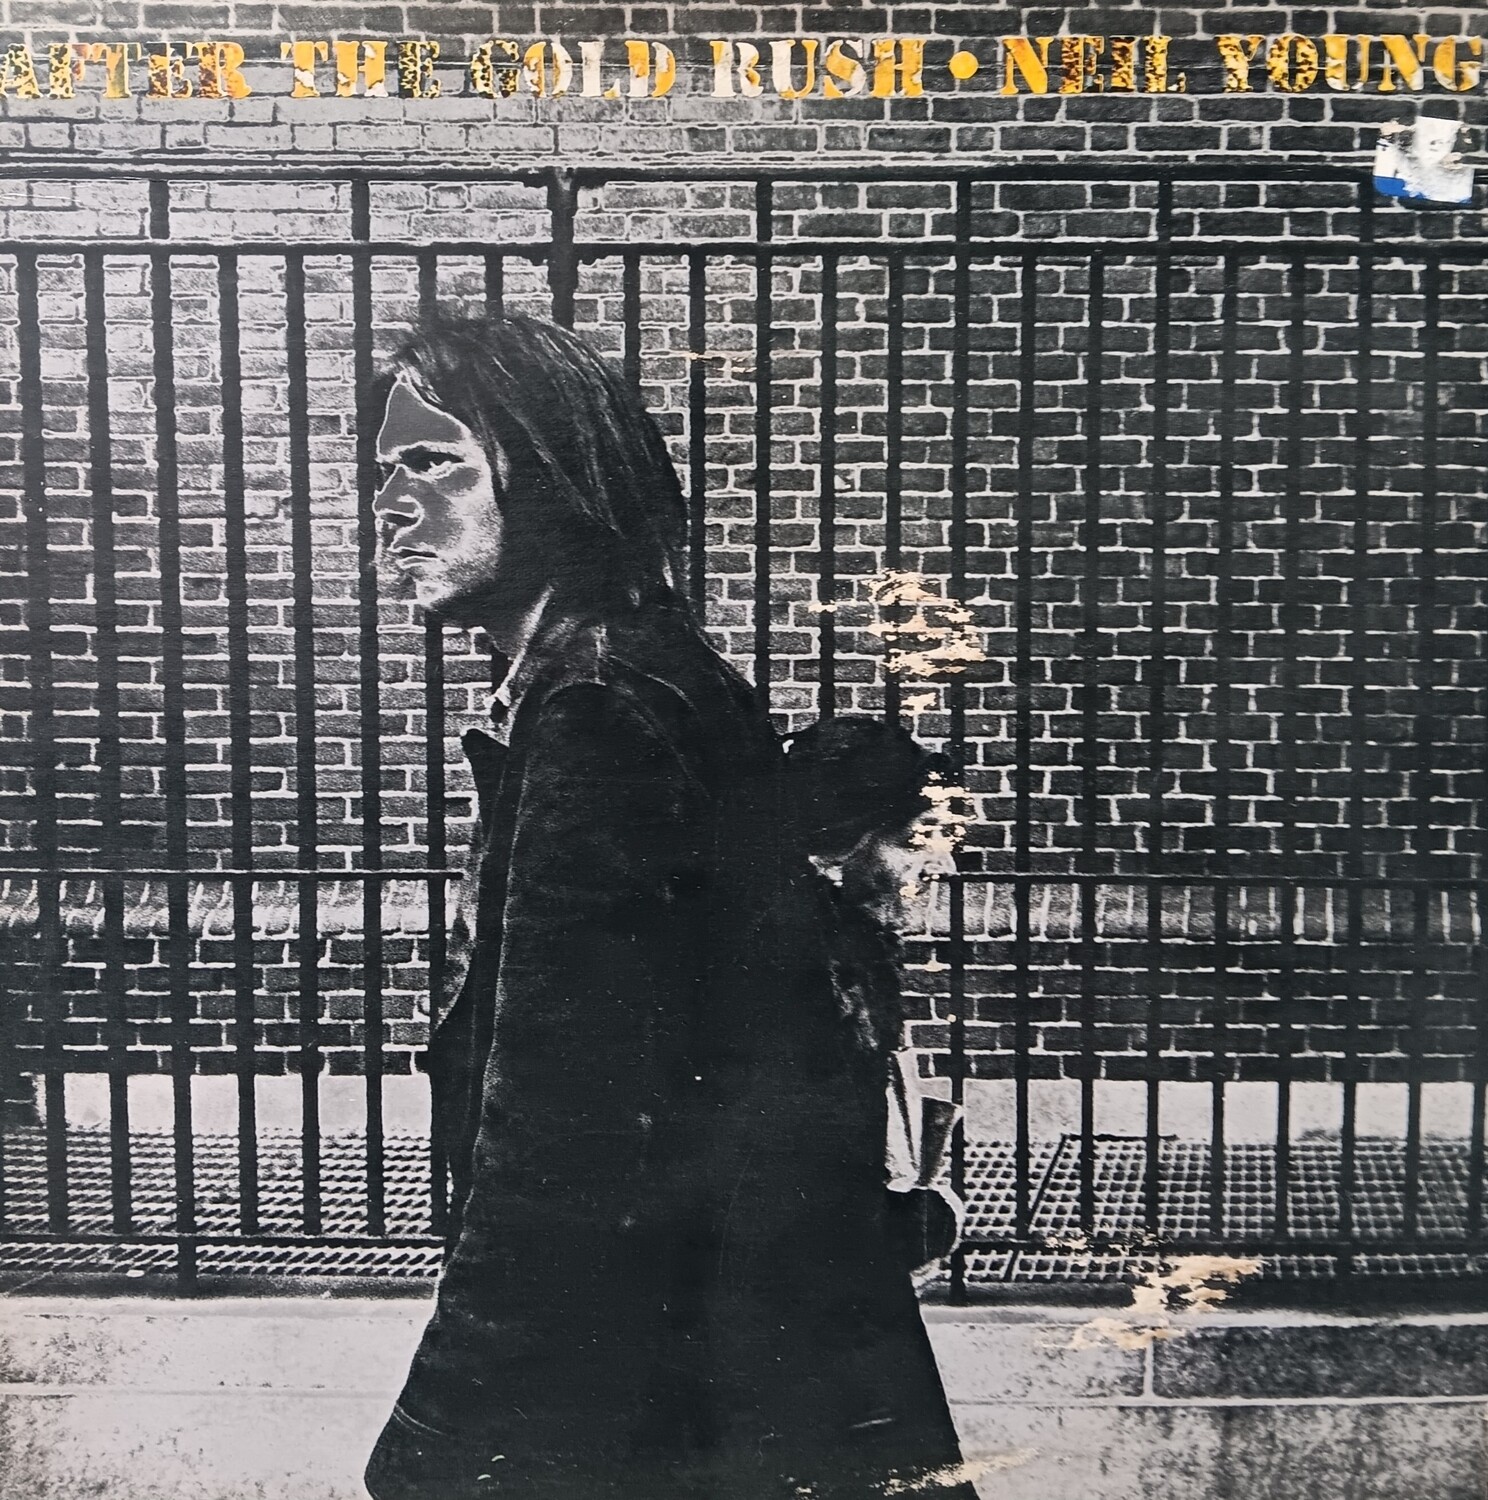 NEIL YOUNG - After the gold rush